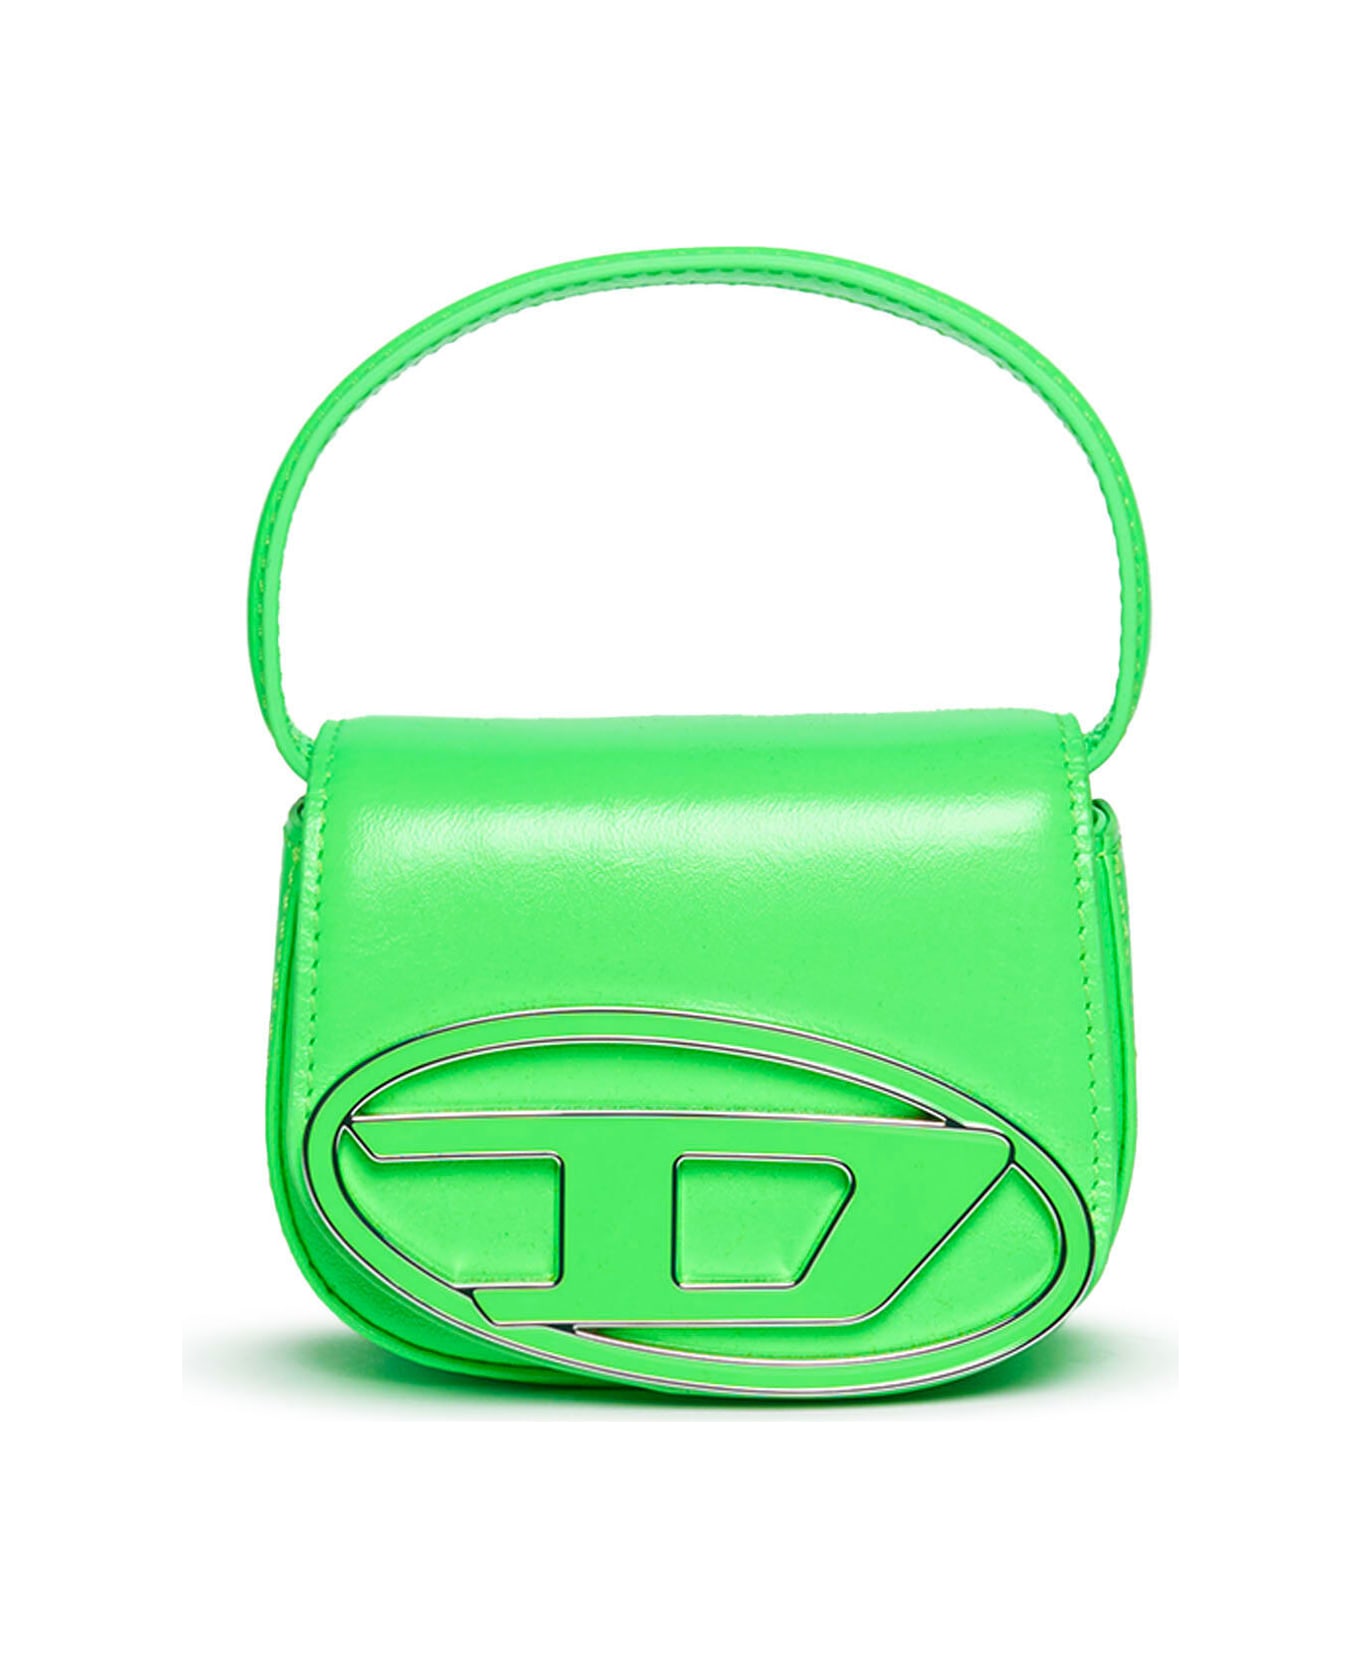 Diesel 1dr Xs Bags Diesel 1dr Xs Bag In Fluo Imitation Leather アクセサリー＆ギフト